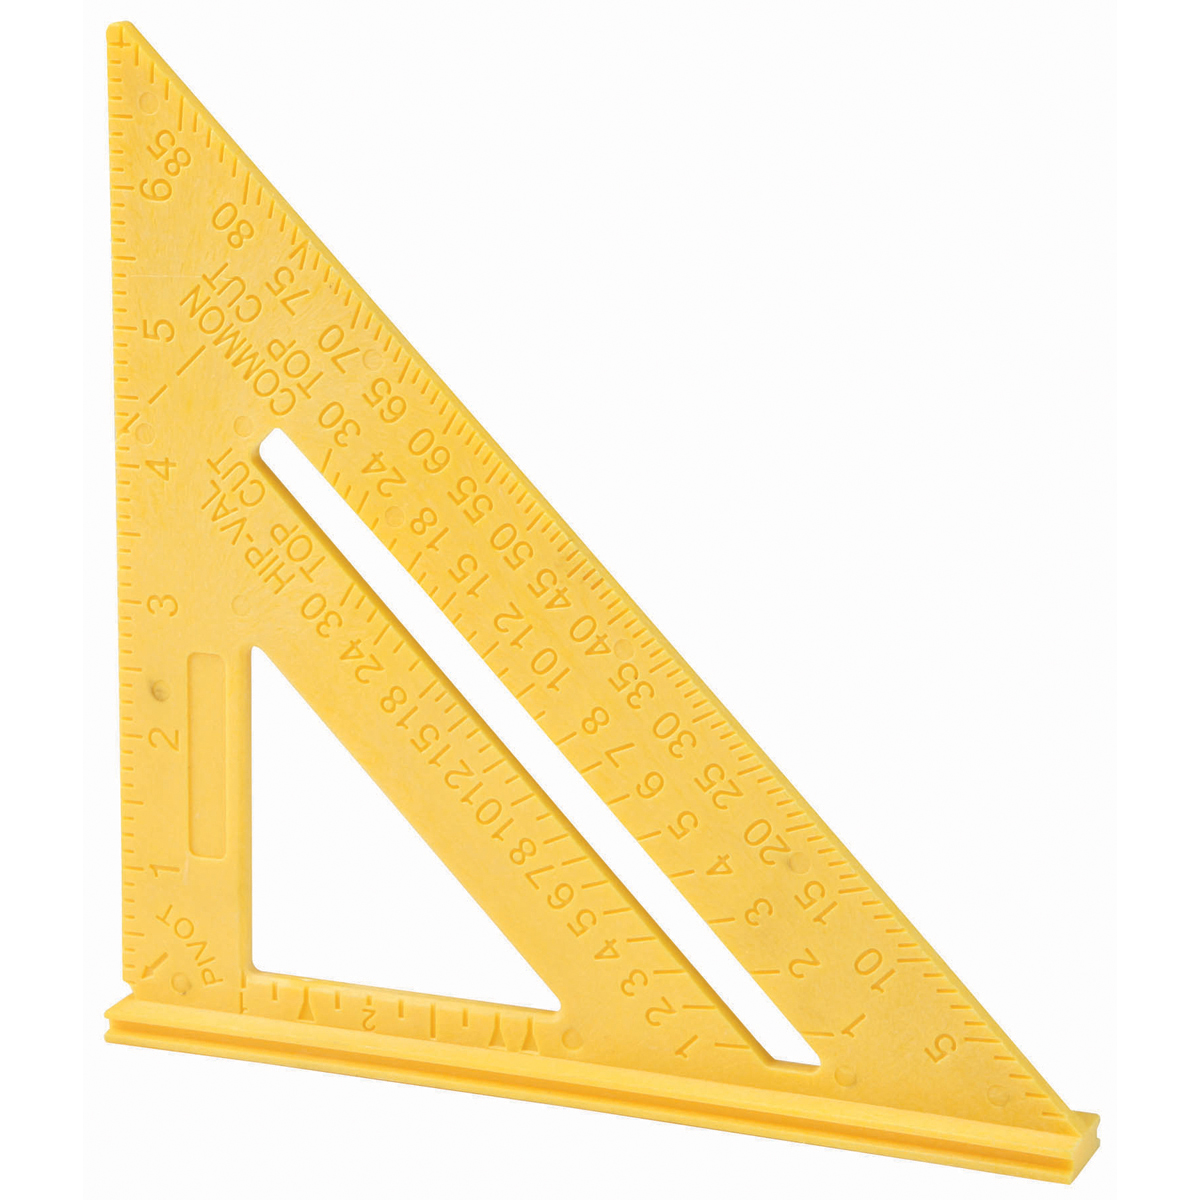 PITTSBURGH 7 in. Rafter Angle Square - Item 69364 / 67805